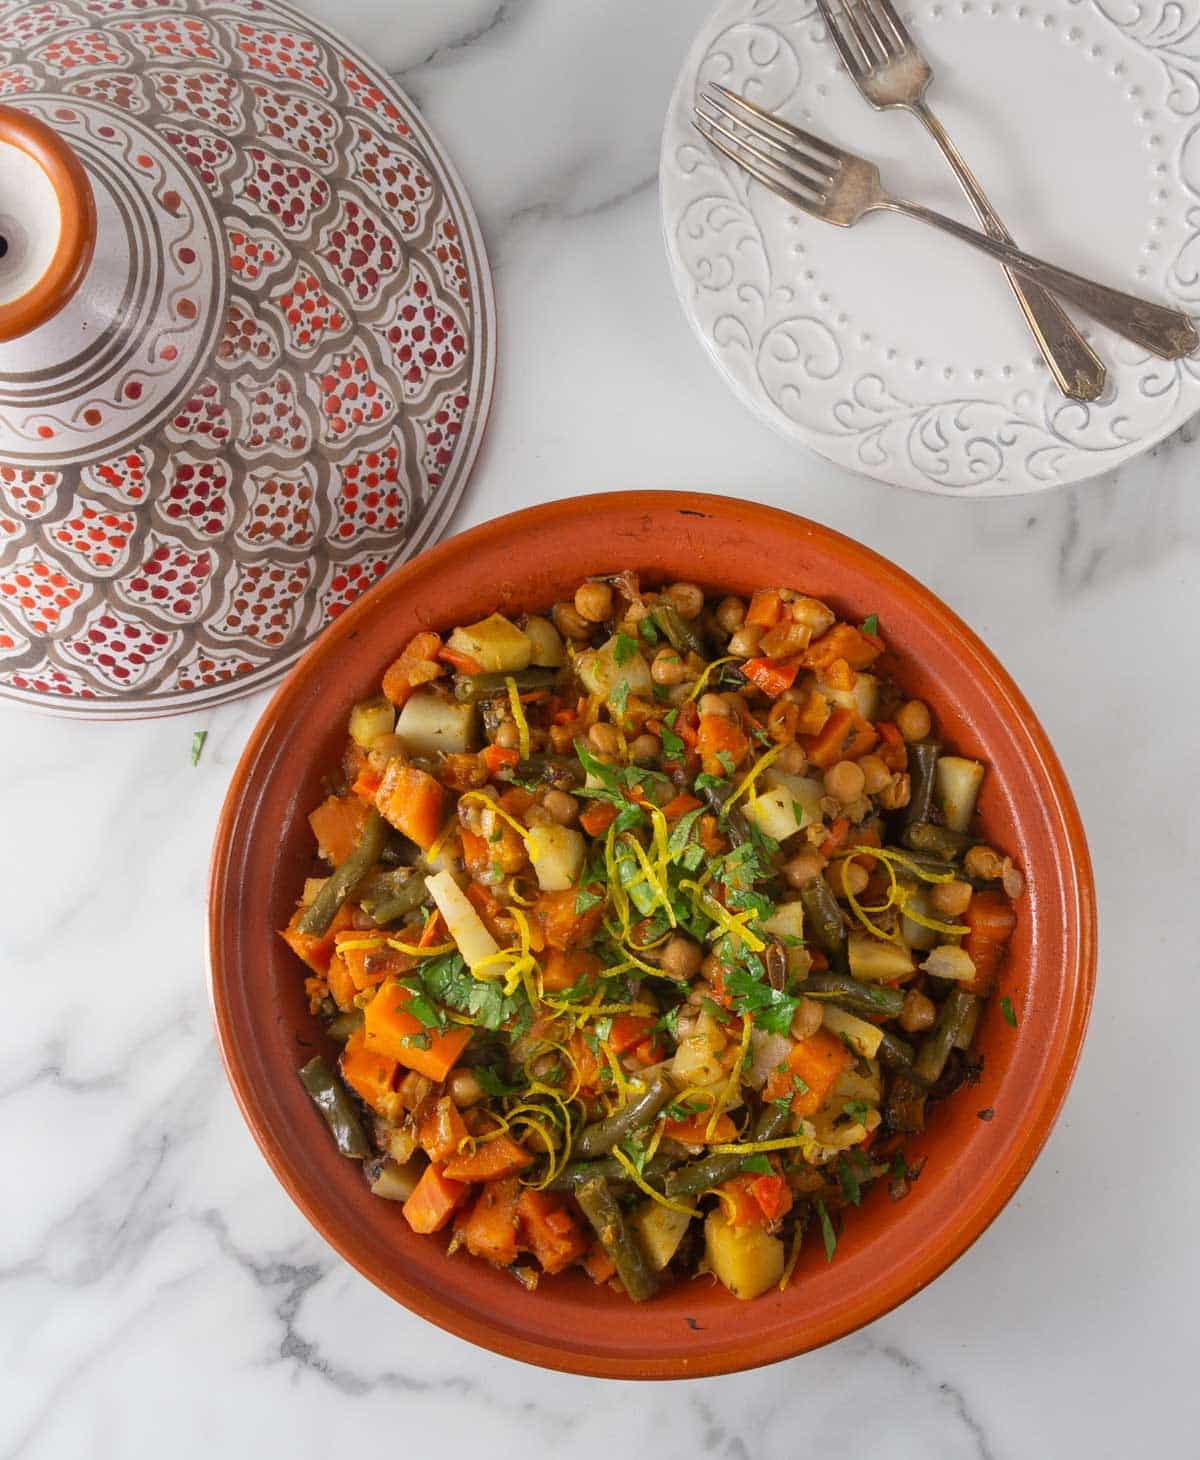 An overhead photo of Moroccan vegetable tagine dish and lid with plates and forks.